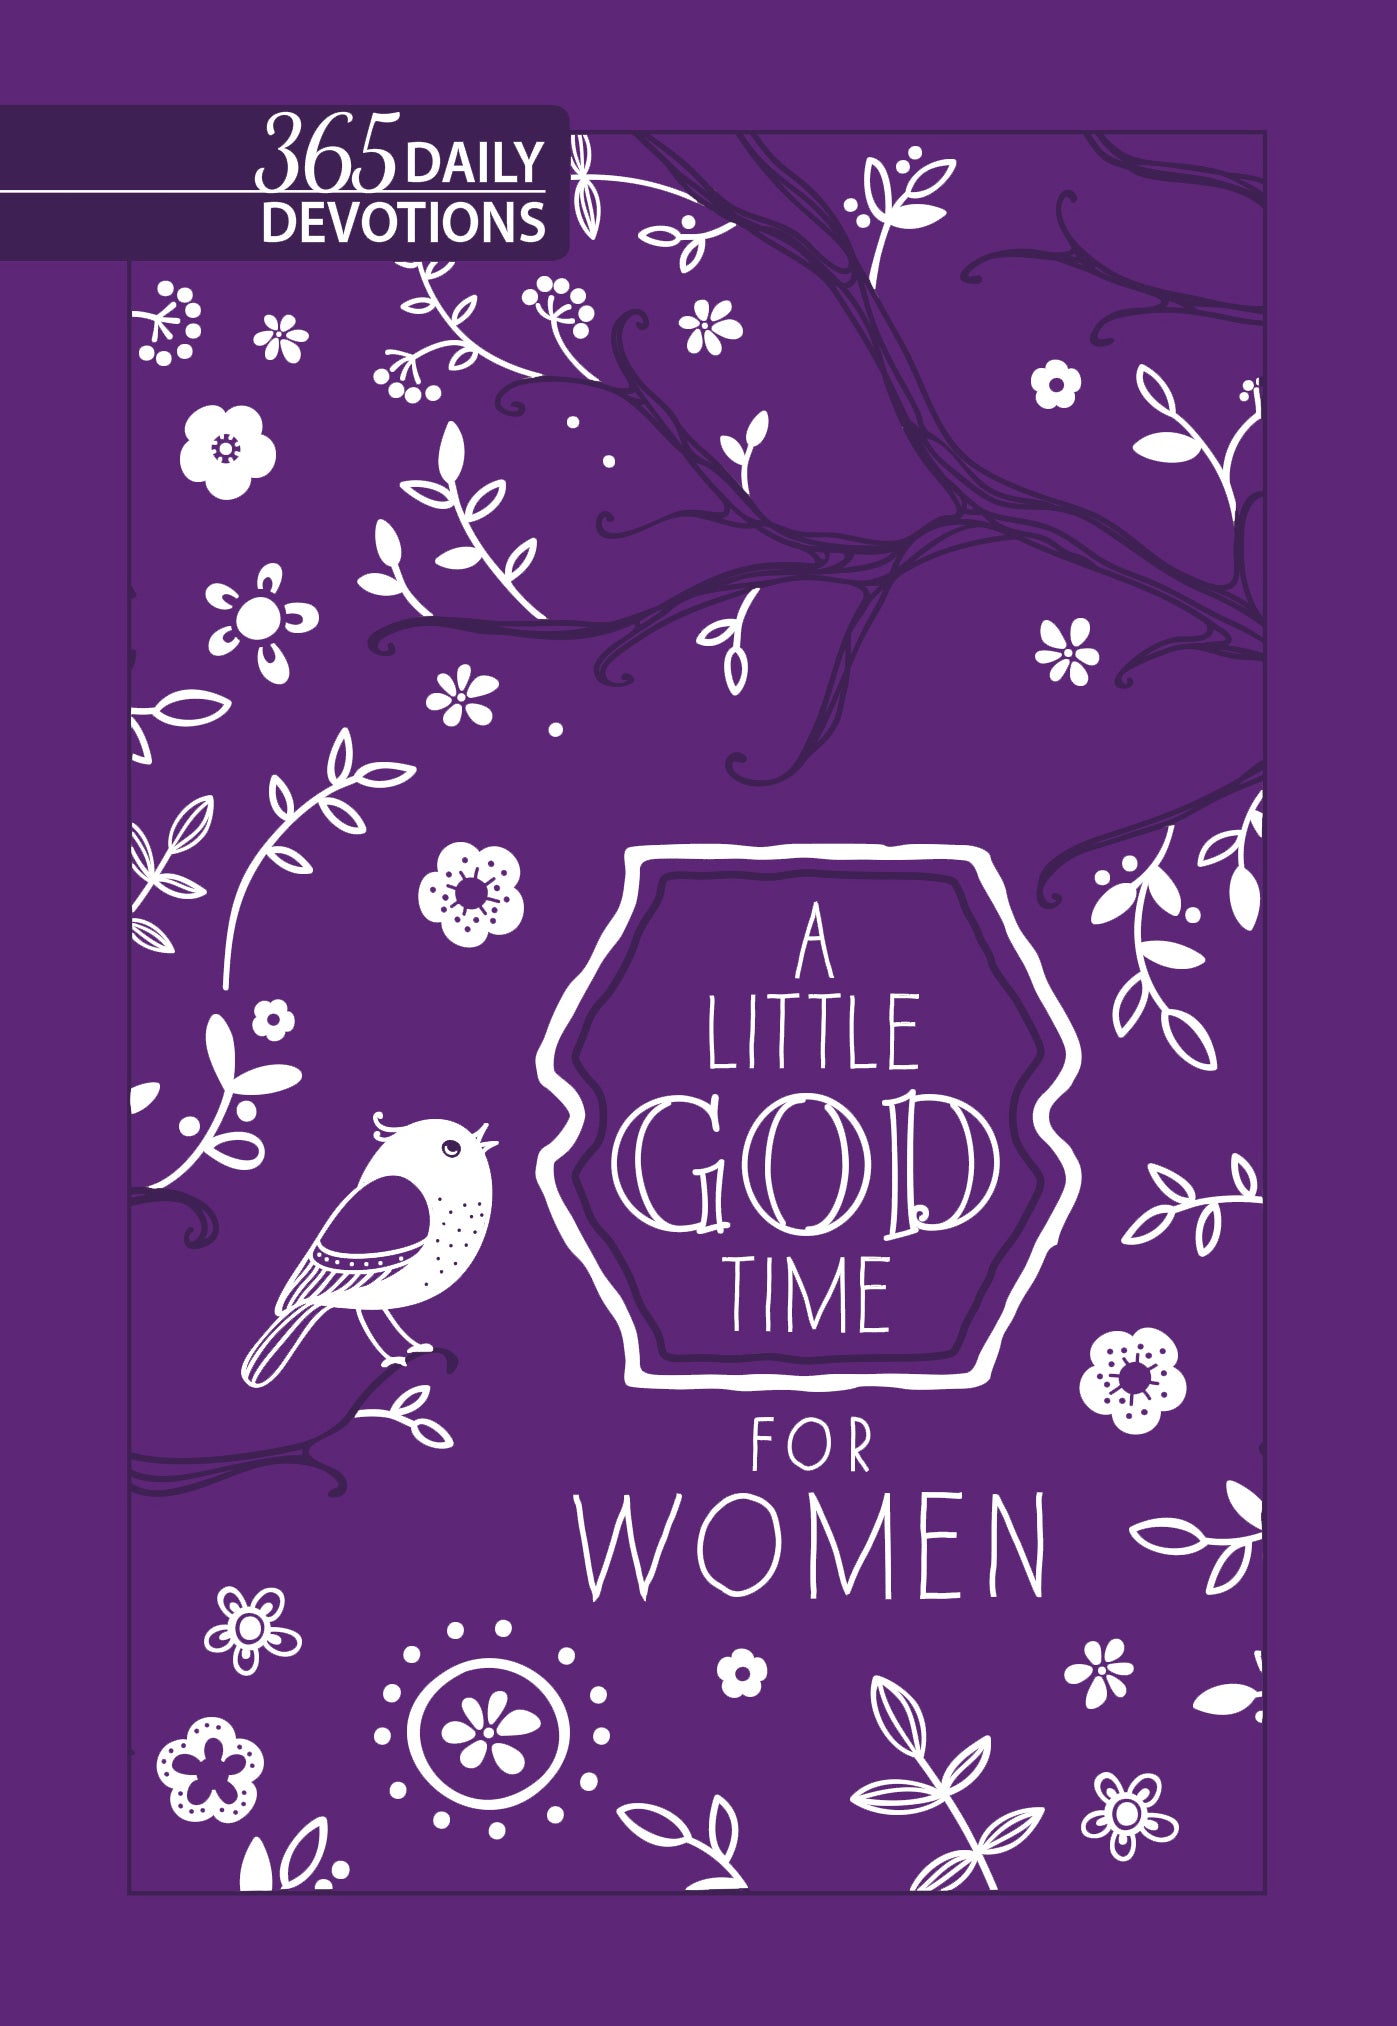 Image of Little God Time for Women, A: 365 Daily Devotions (Purple) other